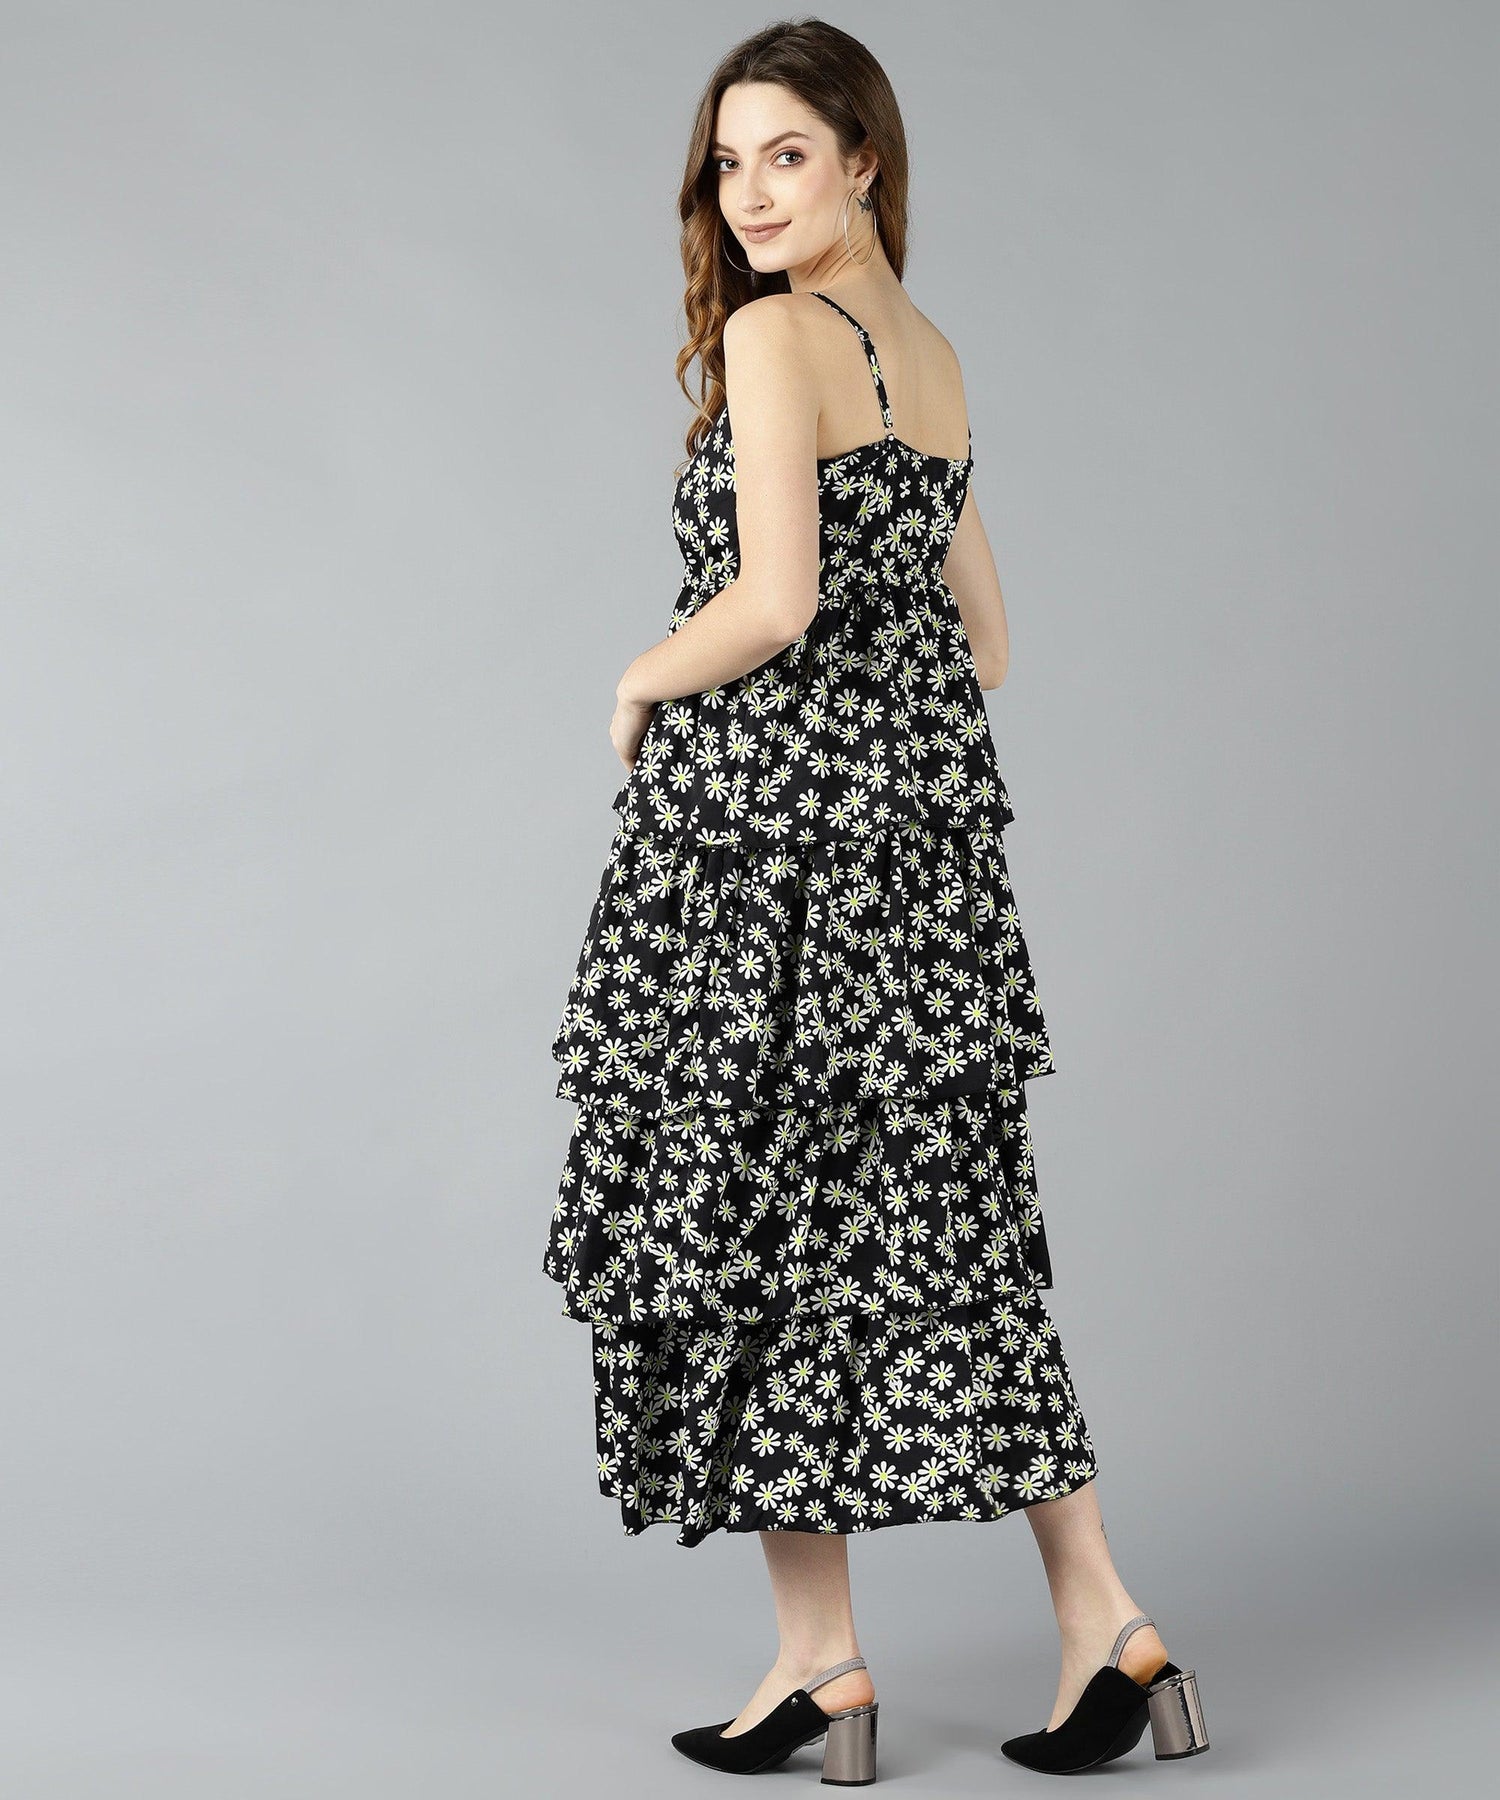 Znx Women White Floral Printed Black Tiered Dress - Znxclothing